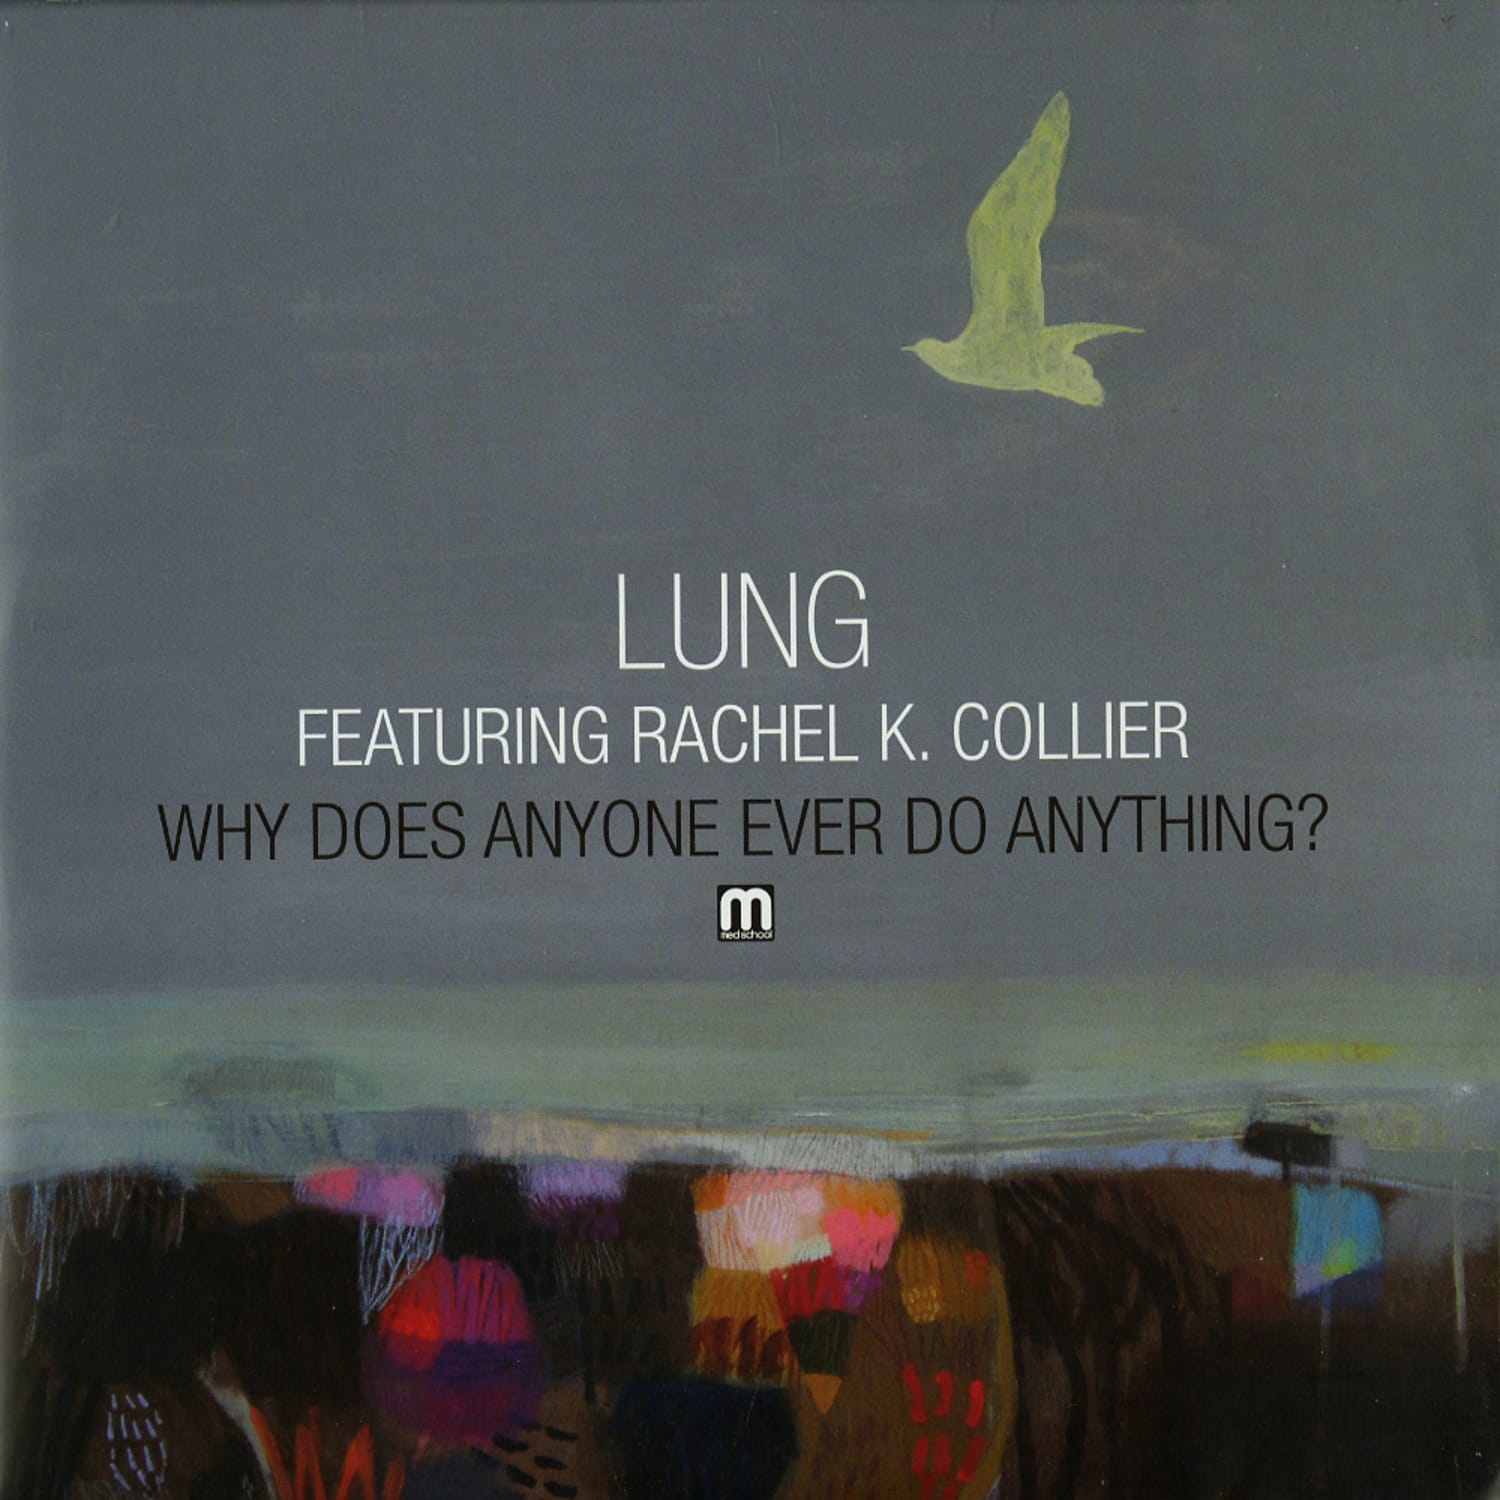 Lung feat. Rachel K. Collier - WHY DOES ANYONE EVER DO ANYTHING?